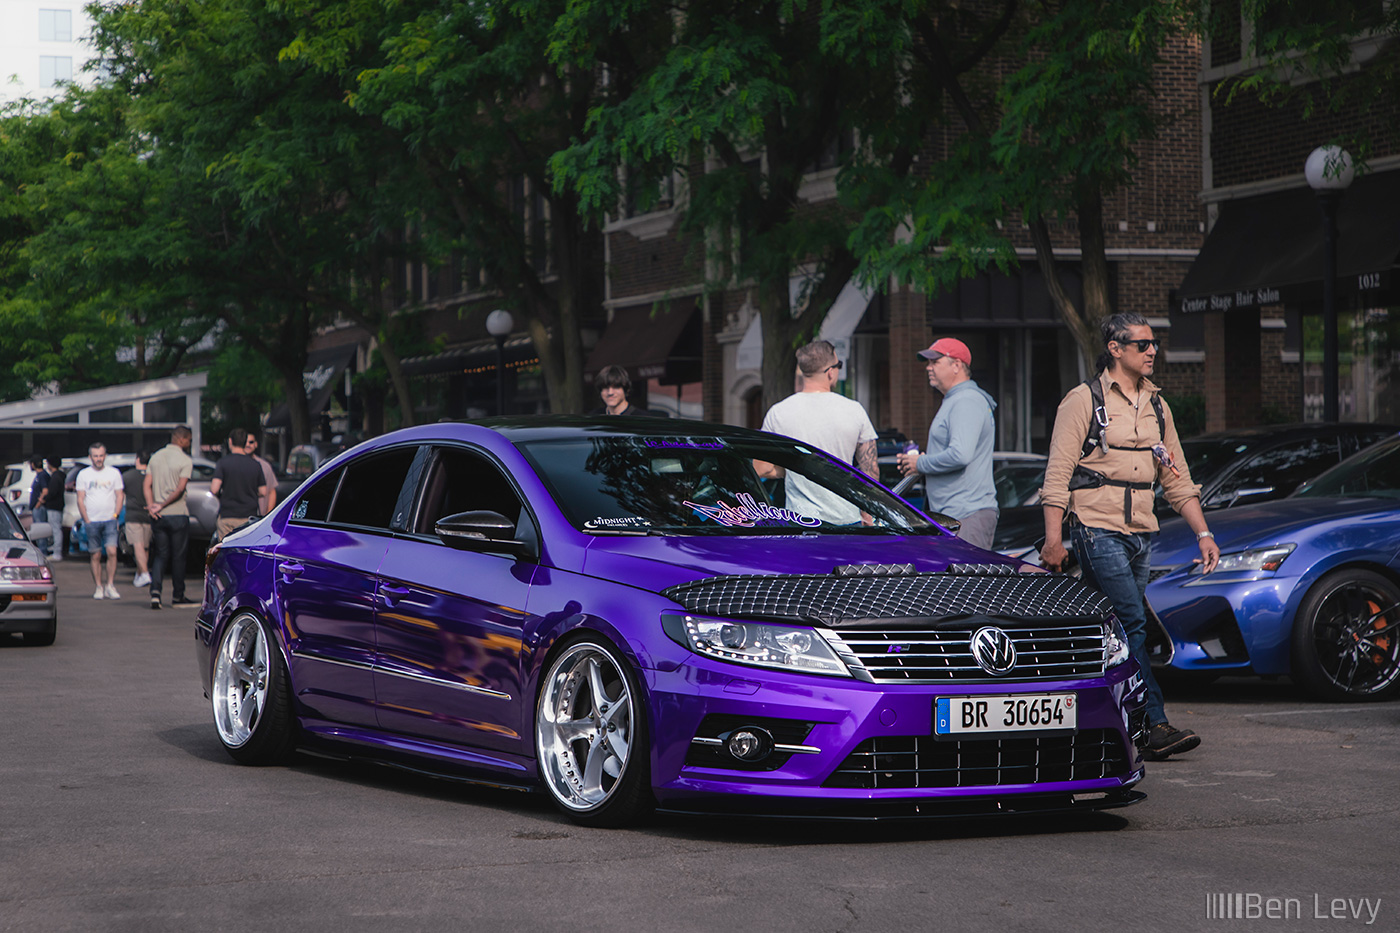 Purple Volkswagen CC at Cars and Coffee